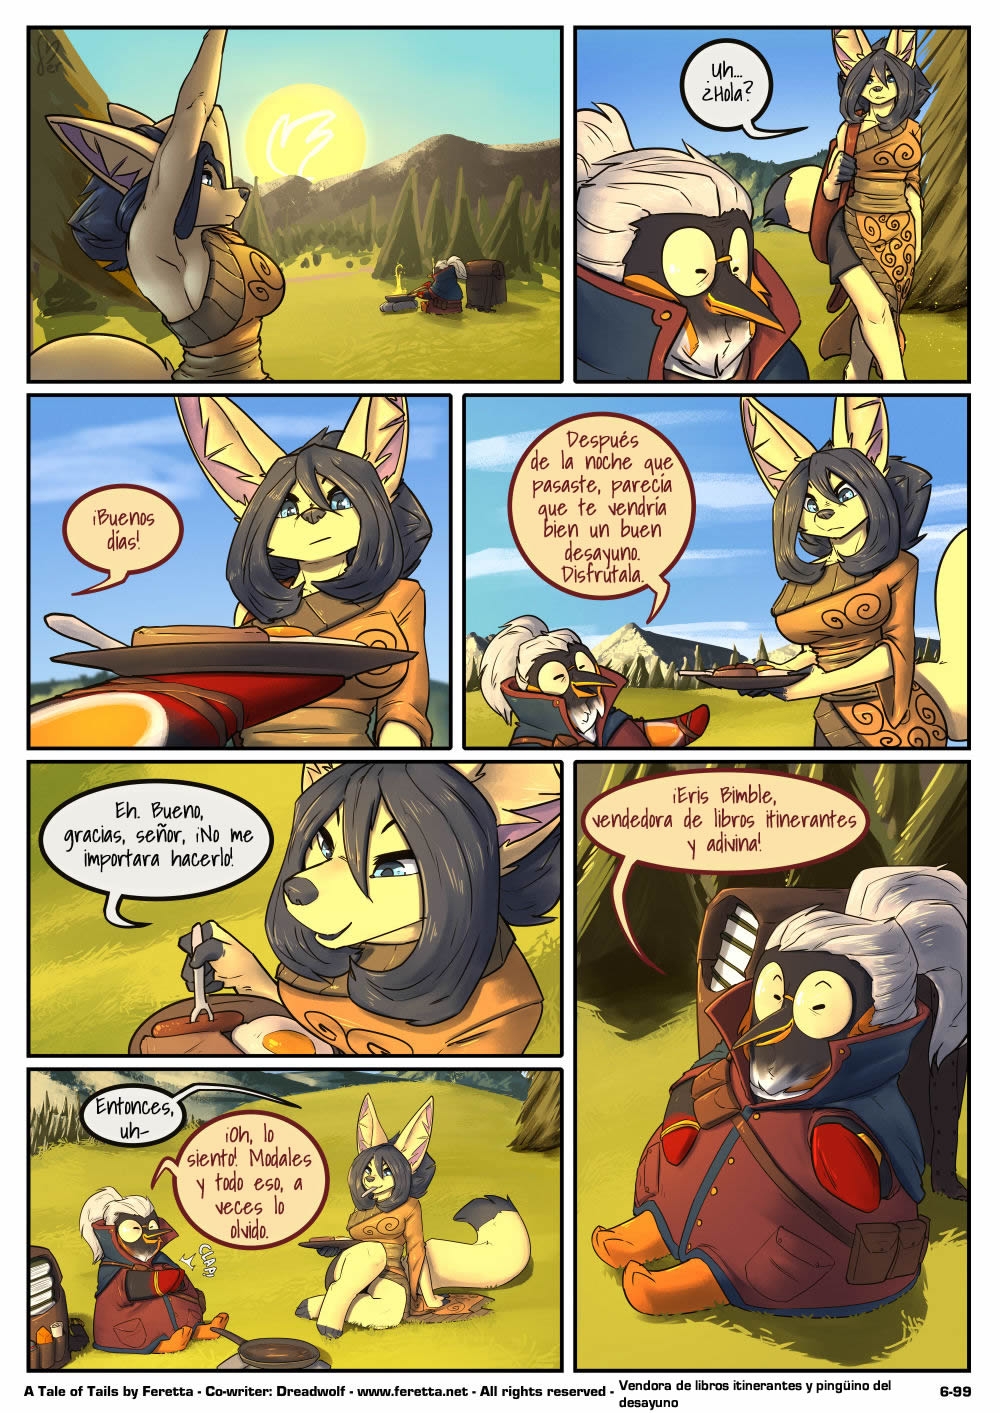 [Feretta] A Tale of Tails: Chapter 6 - Paths converge / Los caminos convergen [Spanish] [Red Fox Makkan] 99